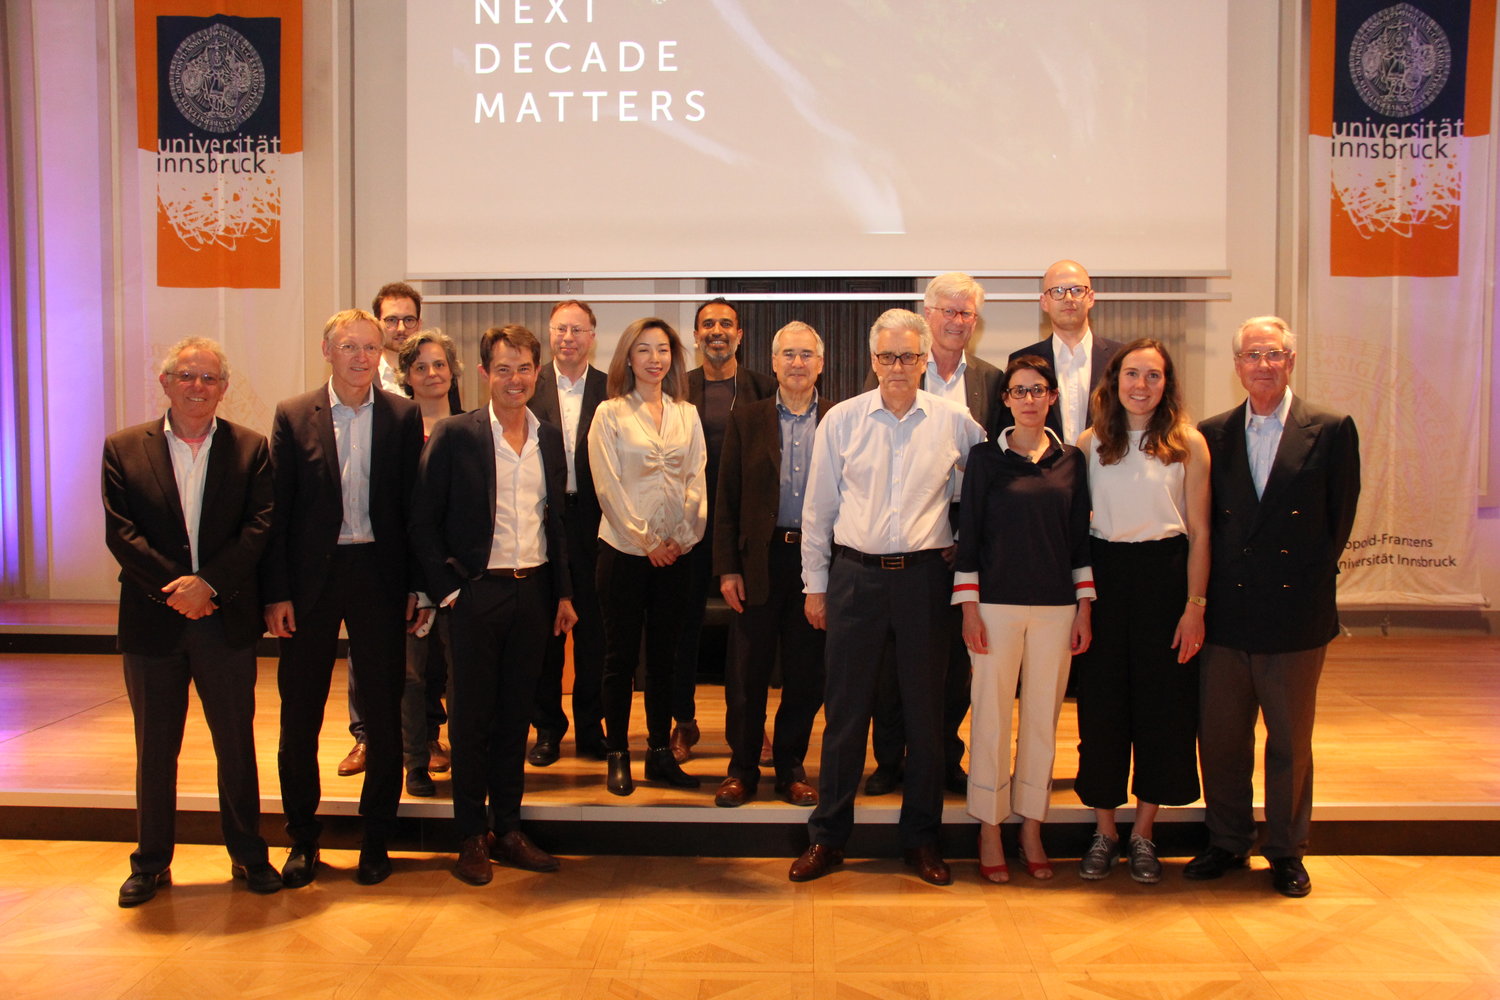 The Next Decade Matters – Public Lecture at University of Innsbruck